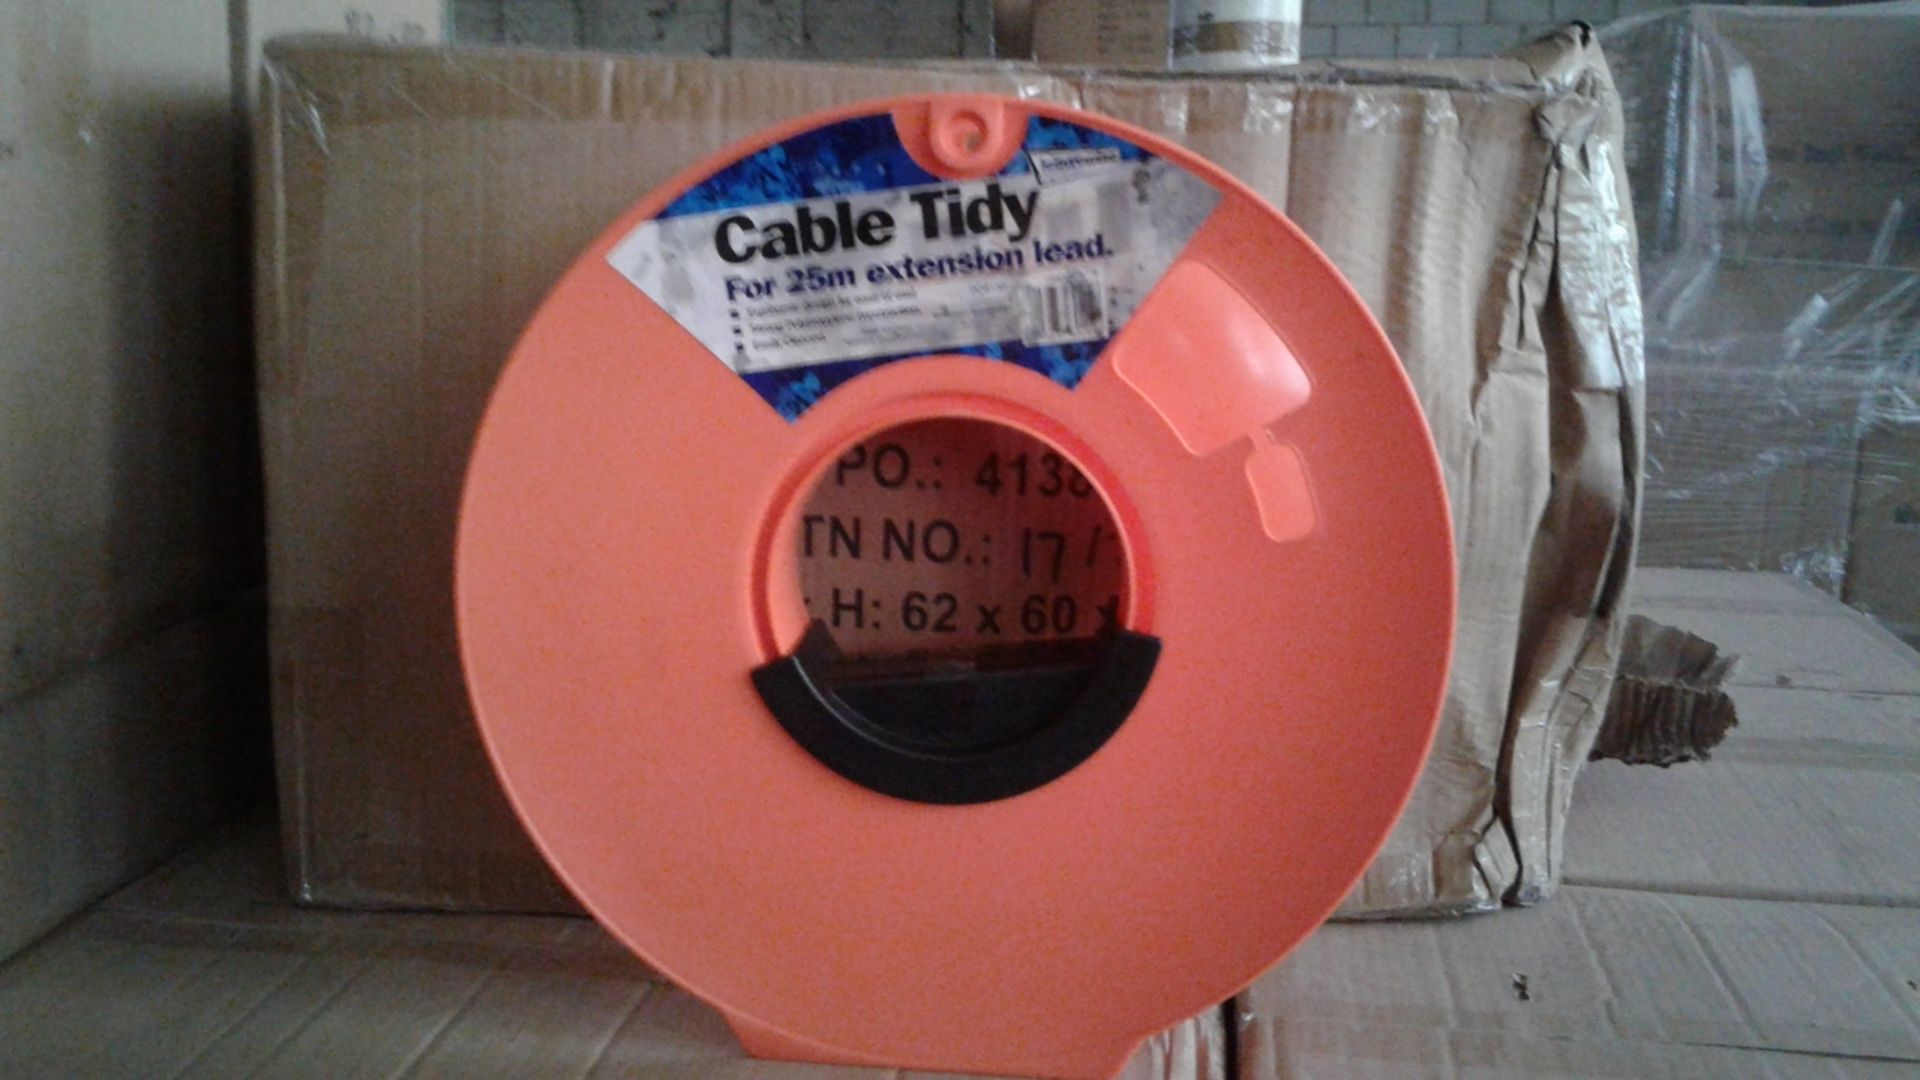 12pcs X Brand new unused 25 Metre cable tidy - 12 in carton